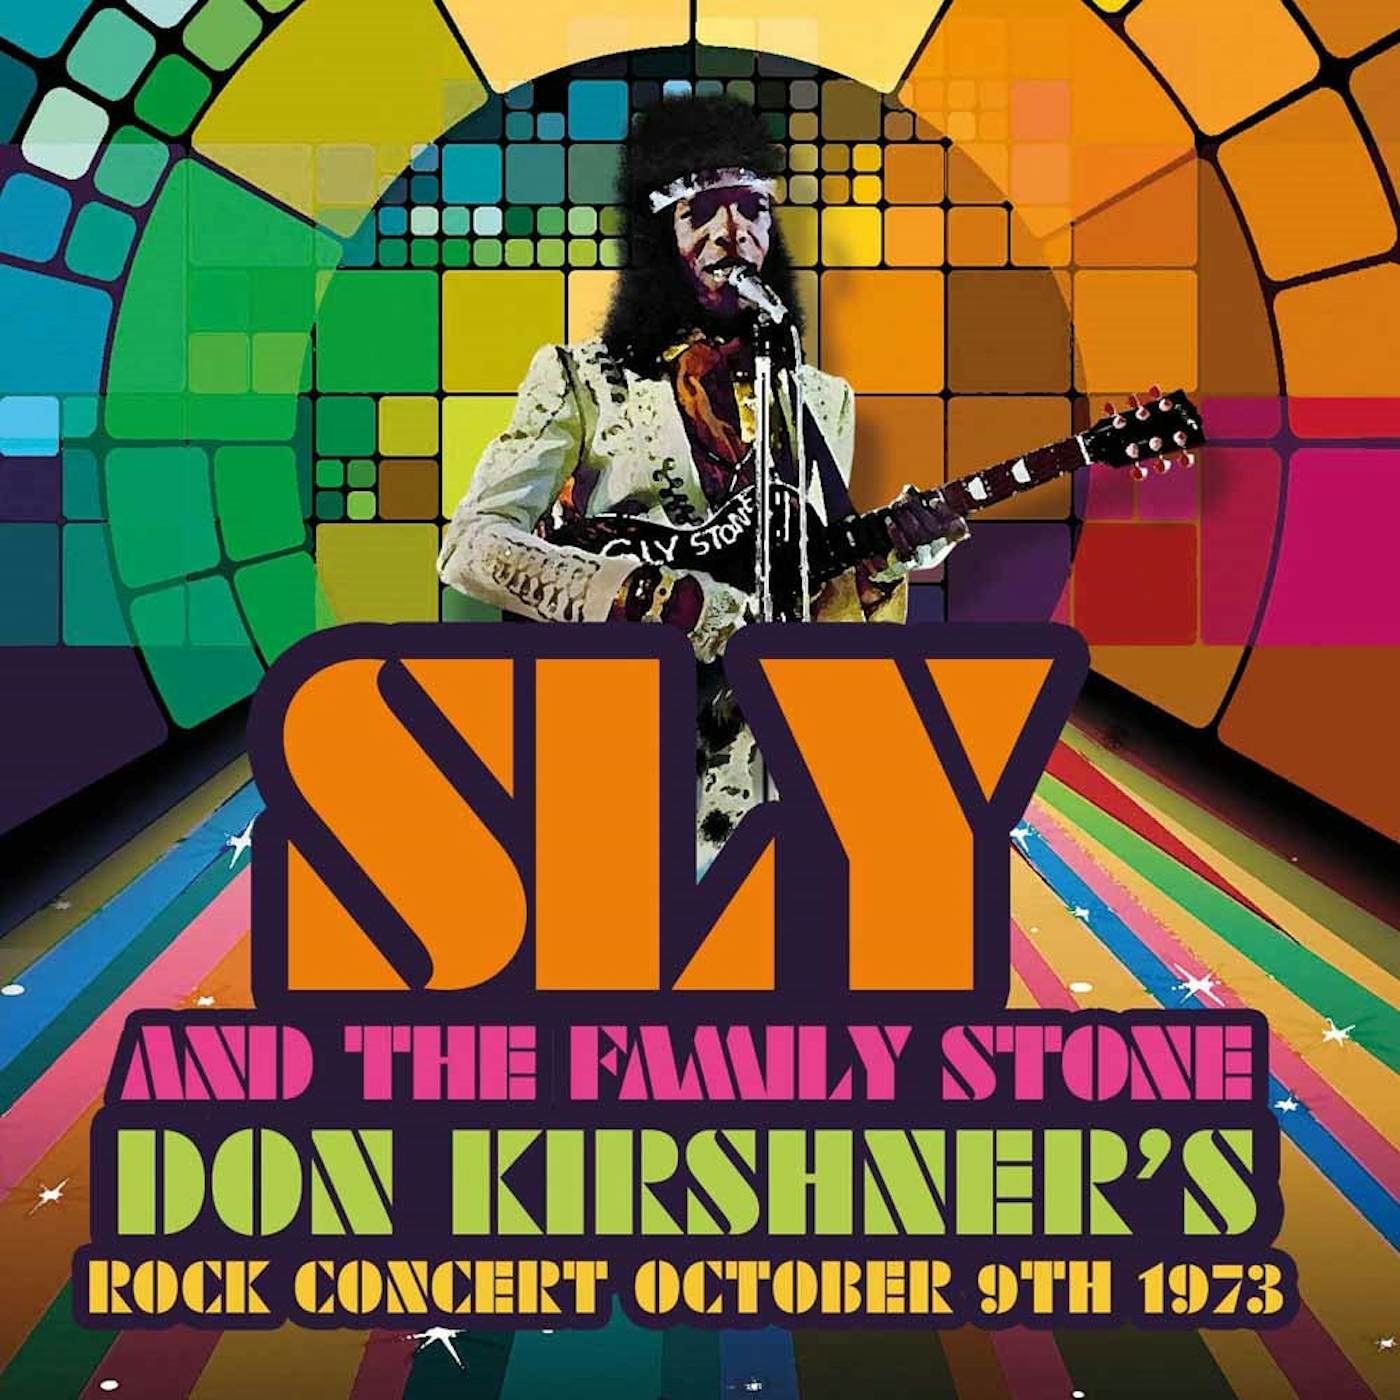 Sly & The Family Stone LP - Don Kirshner'S Rock Concert October 9Th 1973 (180G Purple Vinyl In Sleeve With Insert)